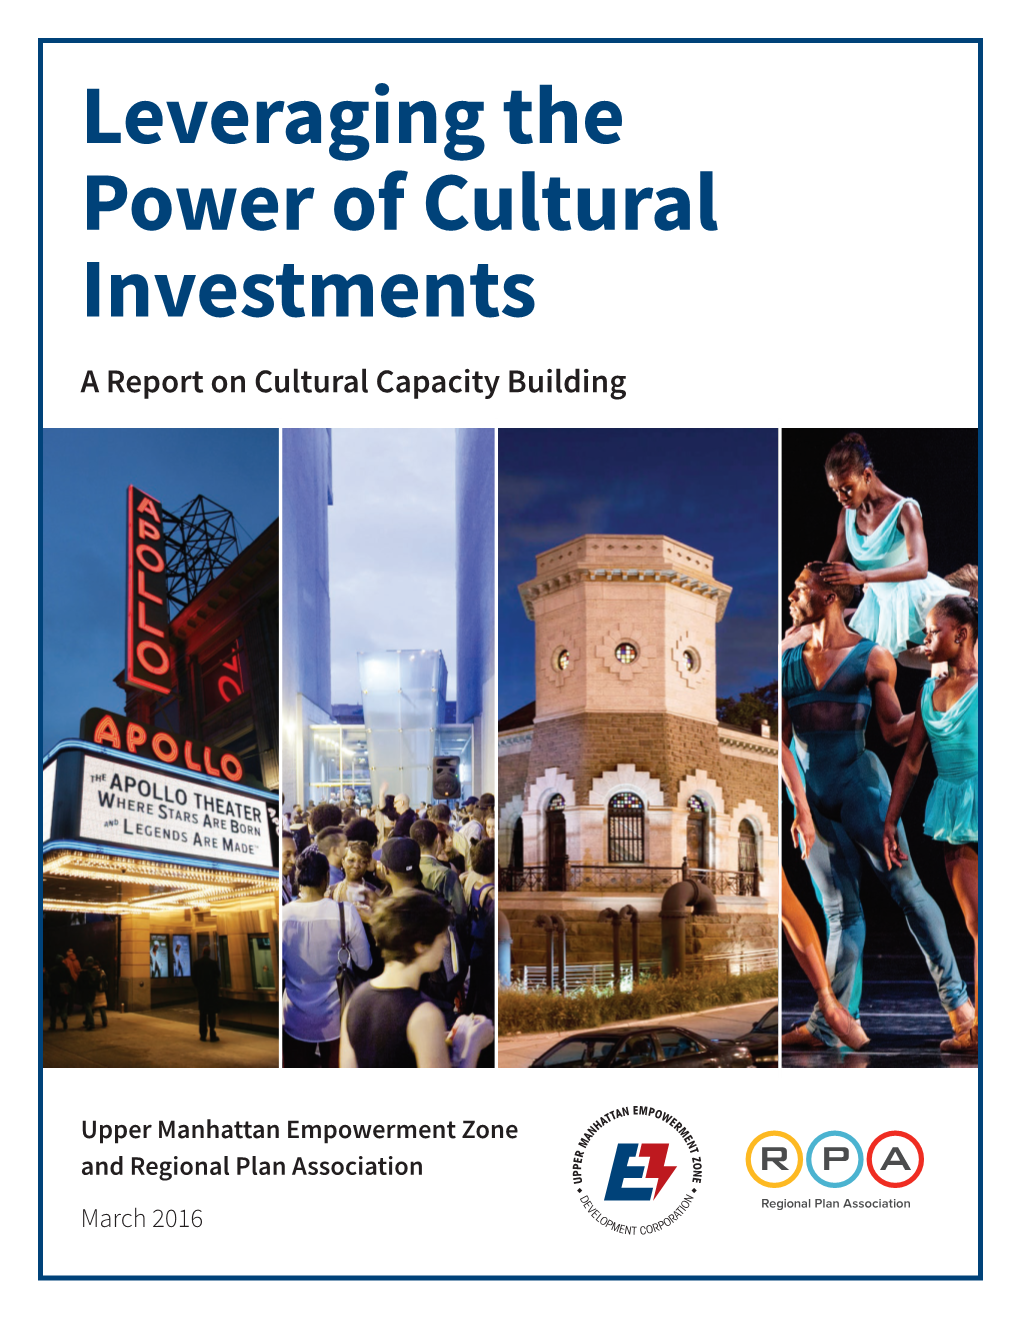 Leveraging the Power of Cultural Investments a Report on Cultural Capacity Building